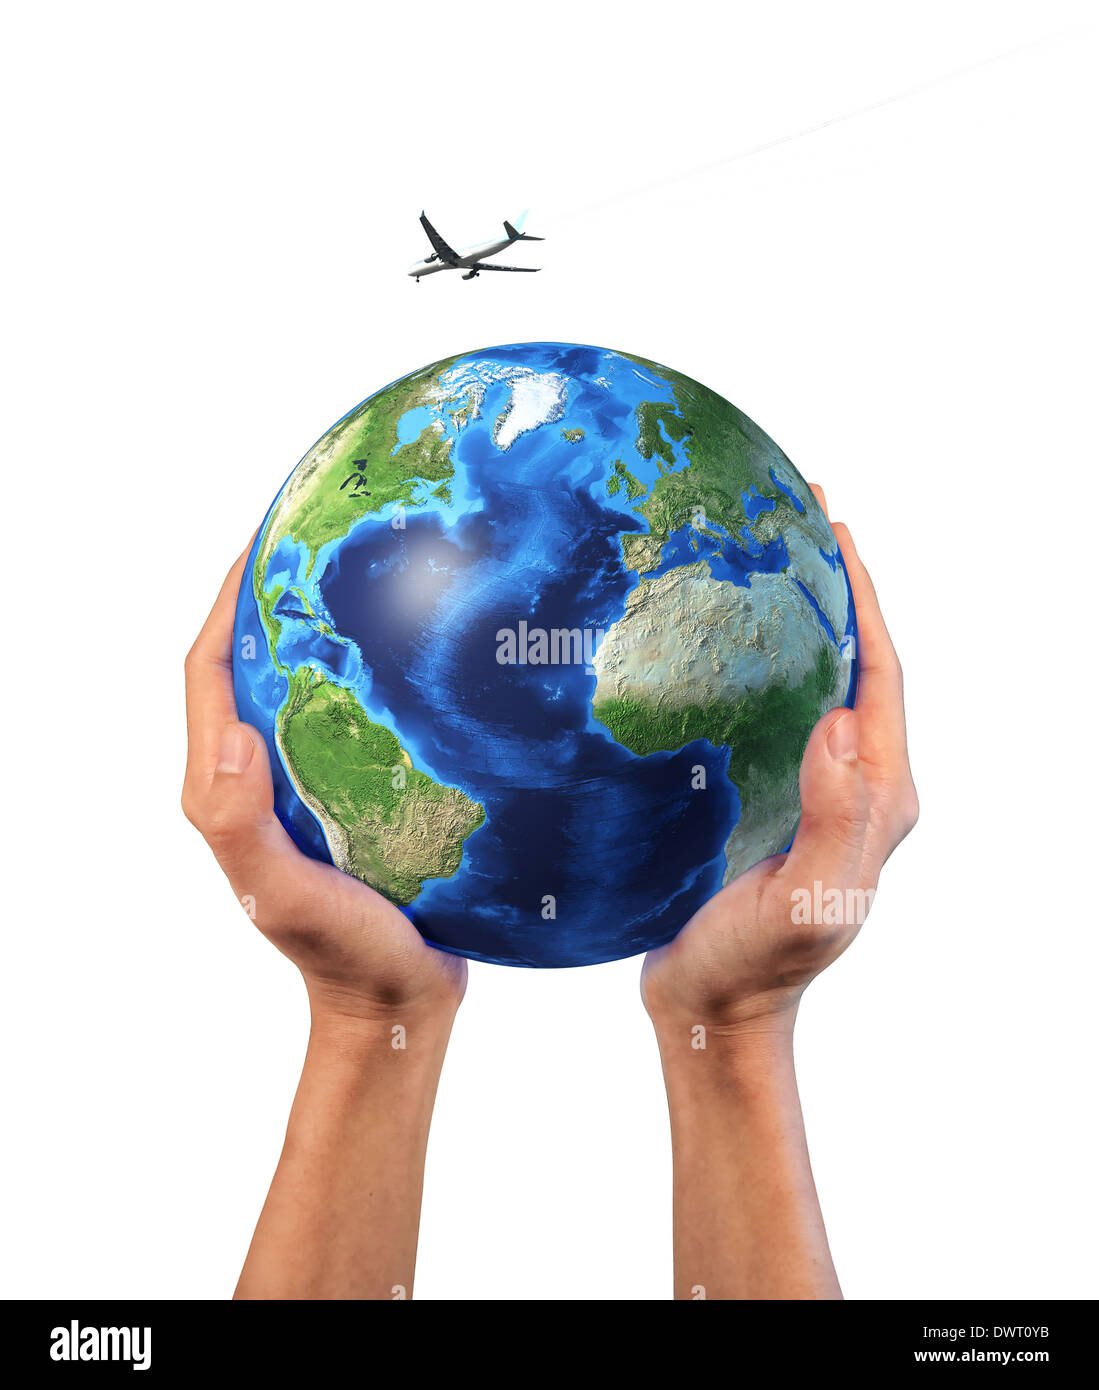 Man's hands holding the planet Earth, with a jet aircraft flying over it, isolated on white background, with clipping path. Stock Photo